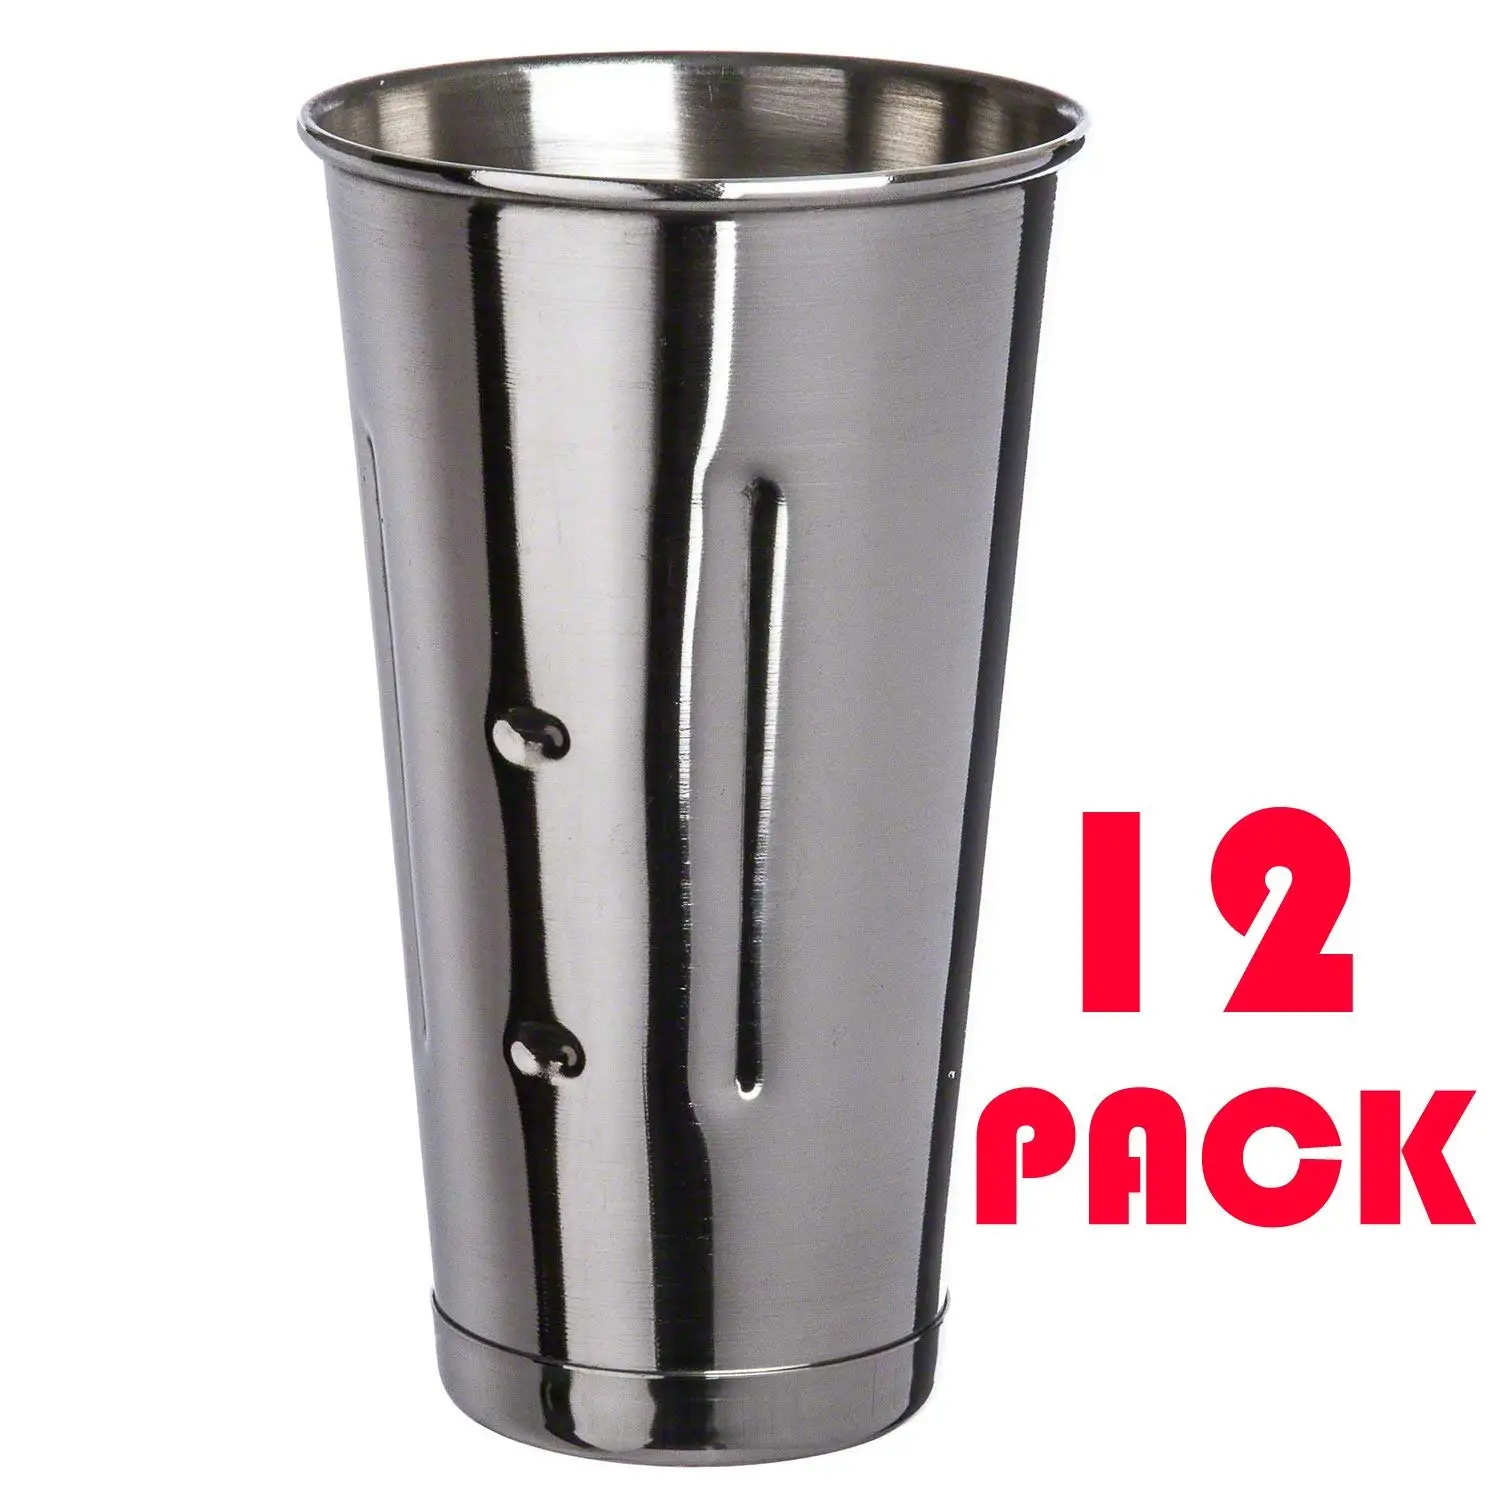 Milkshake Cup Professional Blender Cup Cocktail Mixing Cup 30 oz Stainless Steel Malt Cup by Tezzorio Commercial Grade Malt Cups Set of 2